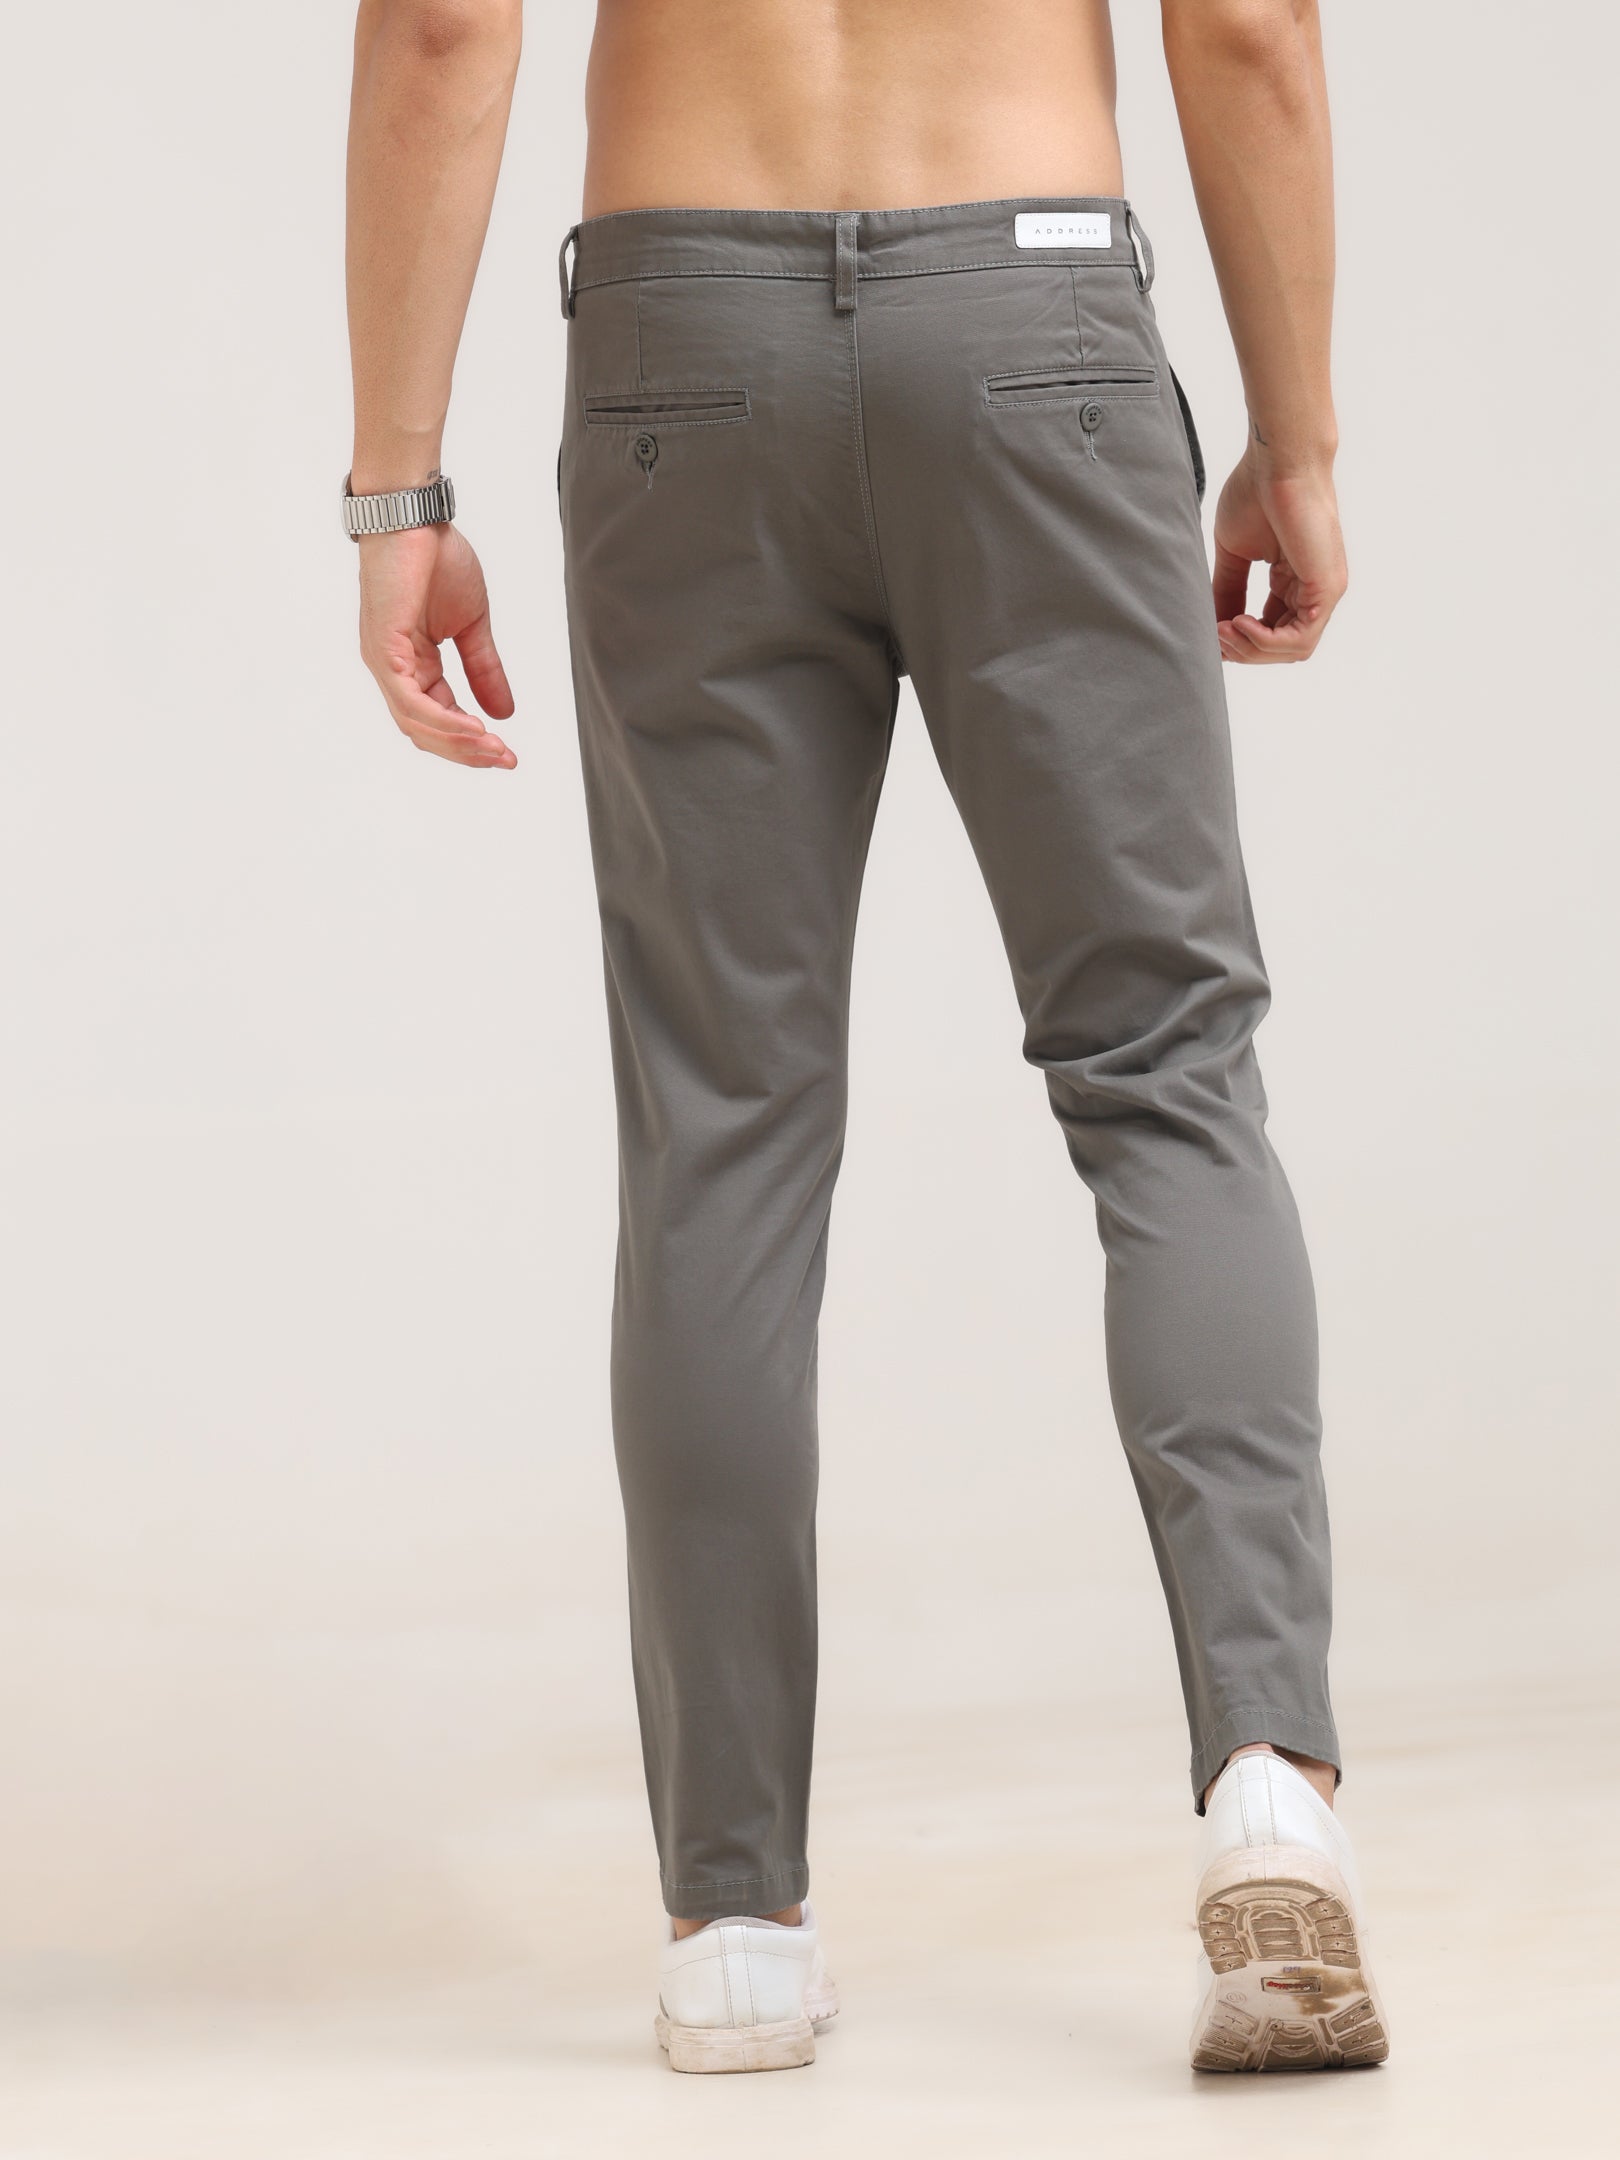 Sag Green Ankle Fit Cotton Pant